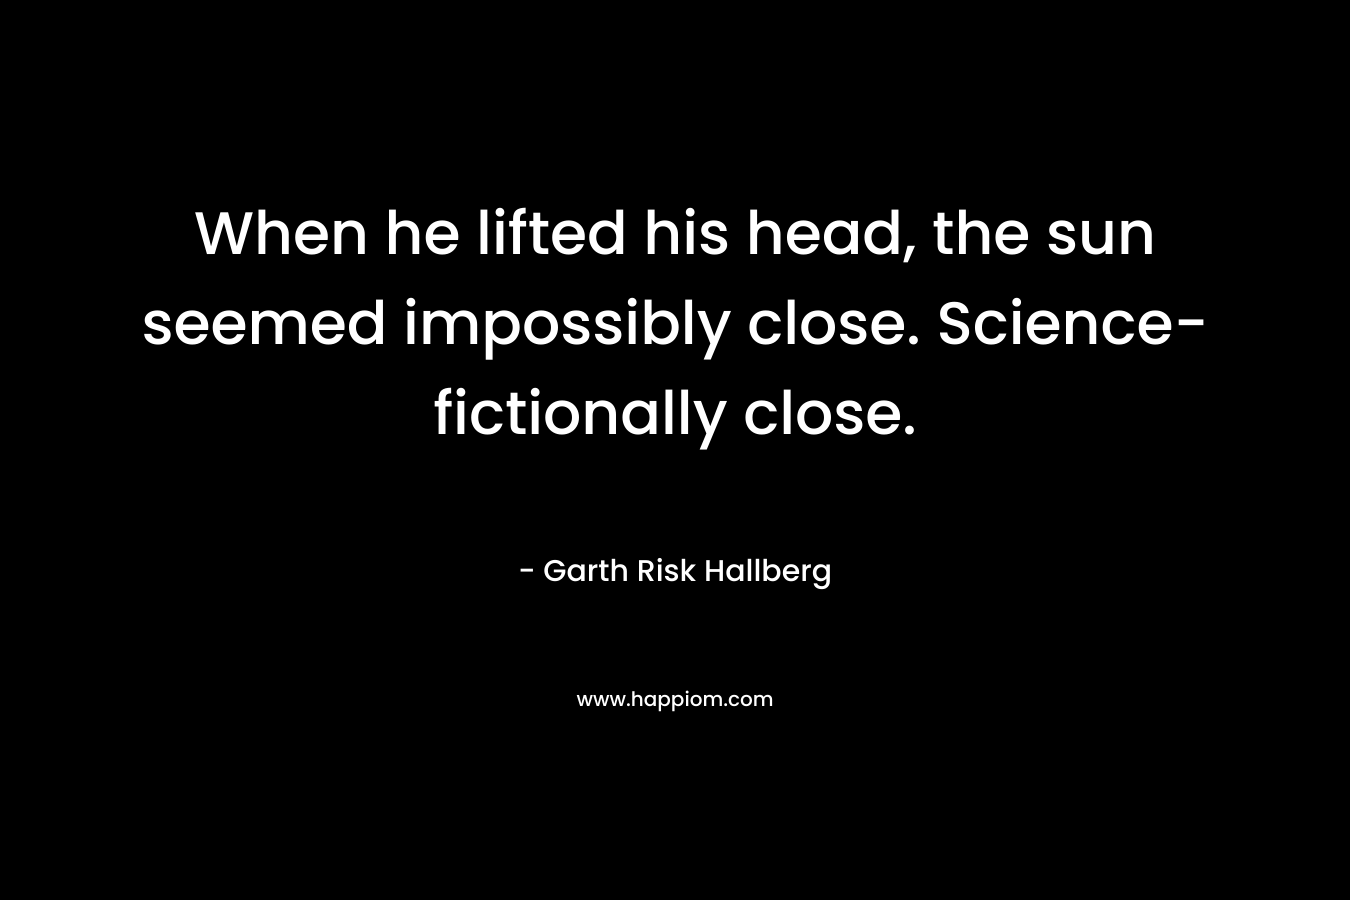 When he lifted his head, the sun seemed impossibly close. Science-fictionally close. – Garth Risk Hallberg